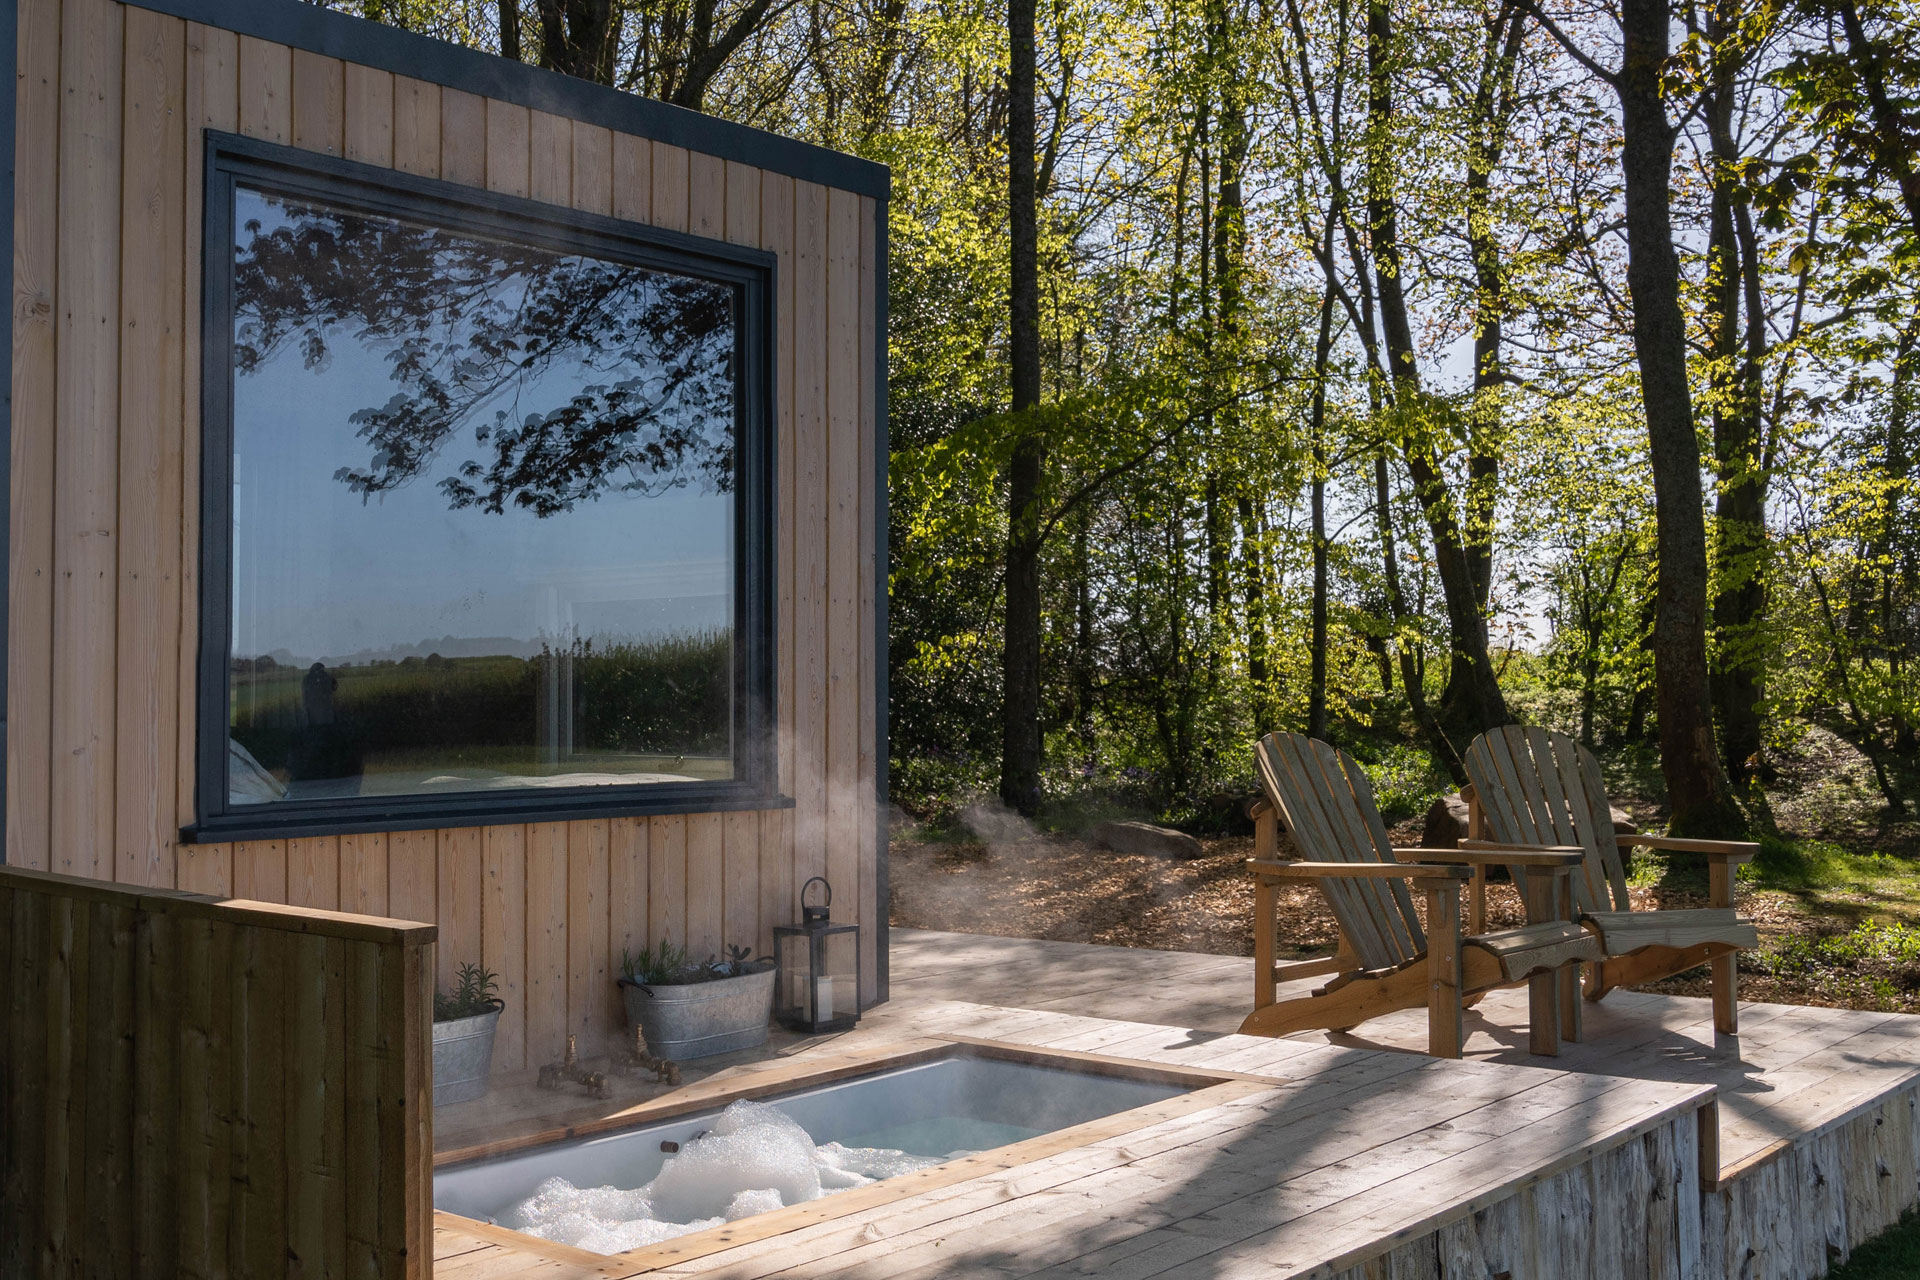 a glamping holiday in the UK called Cedars Kabin, with a forest and a wooden sauna as part of the accommodation